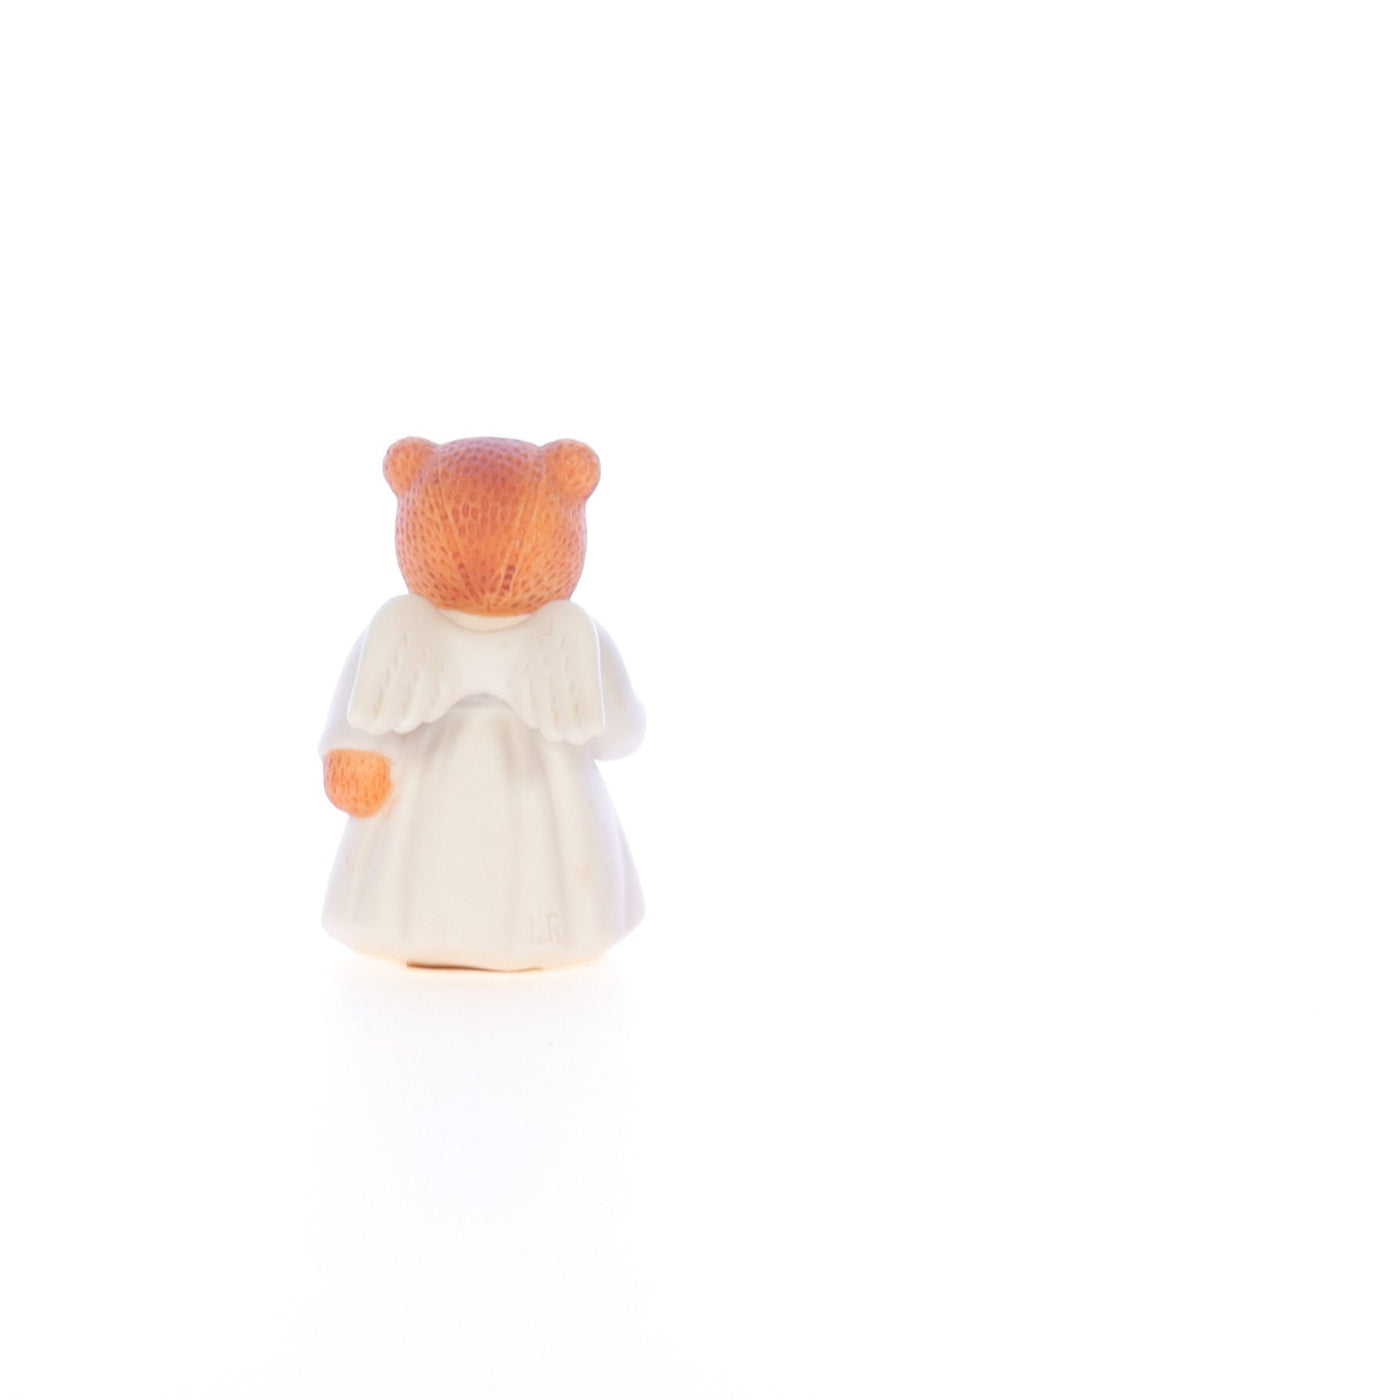 Lucy_And_Me_by_Lucy_Atwell_Porcelain_Figurine_Angel_of_Love_Bear_Lucy_Unknown_049_05